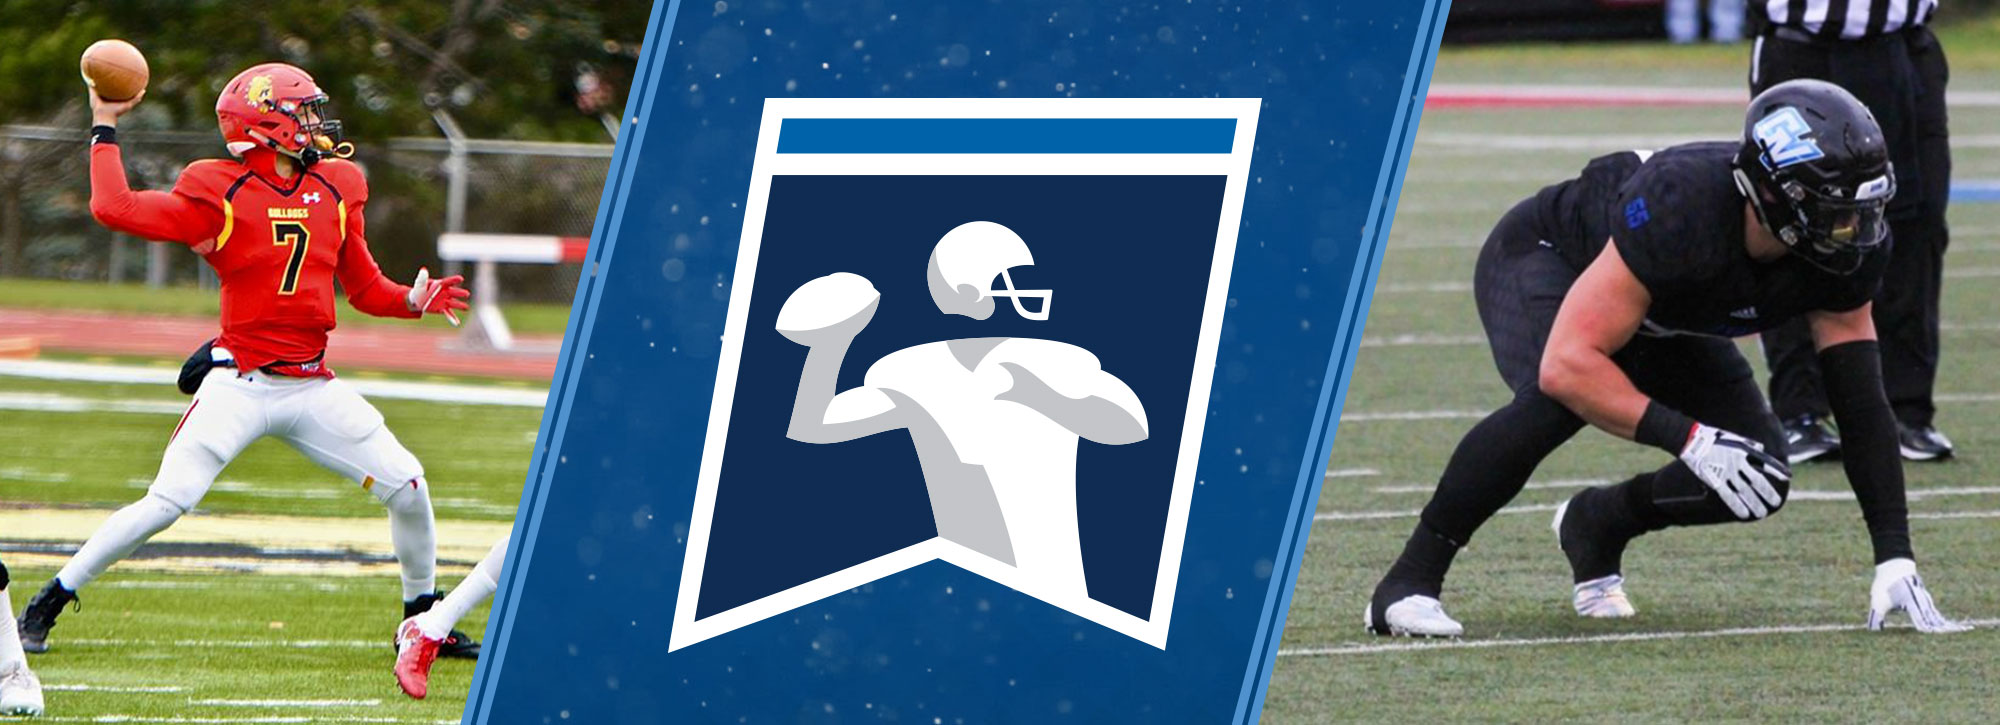 Ferris State & Grand Valley State Unchanged High Atop Super Region Three Football Rankings